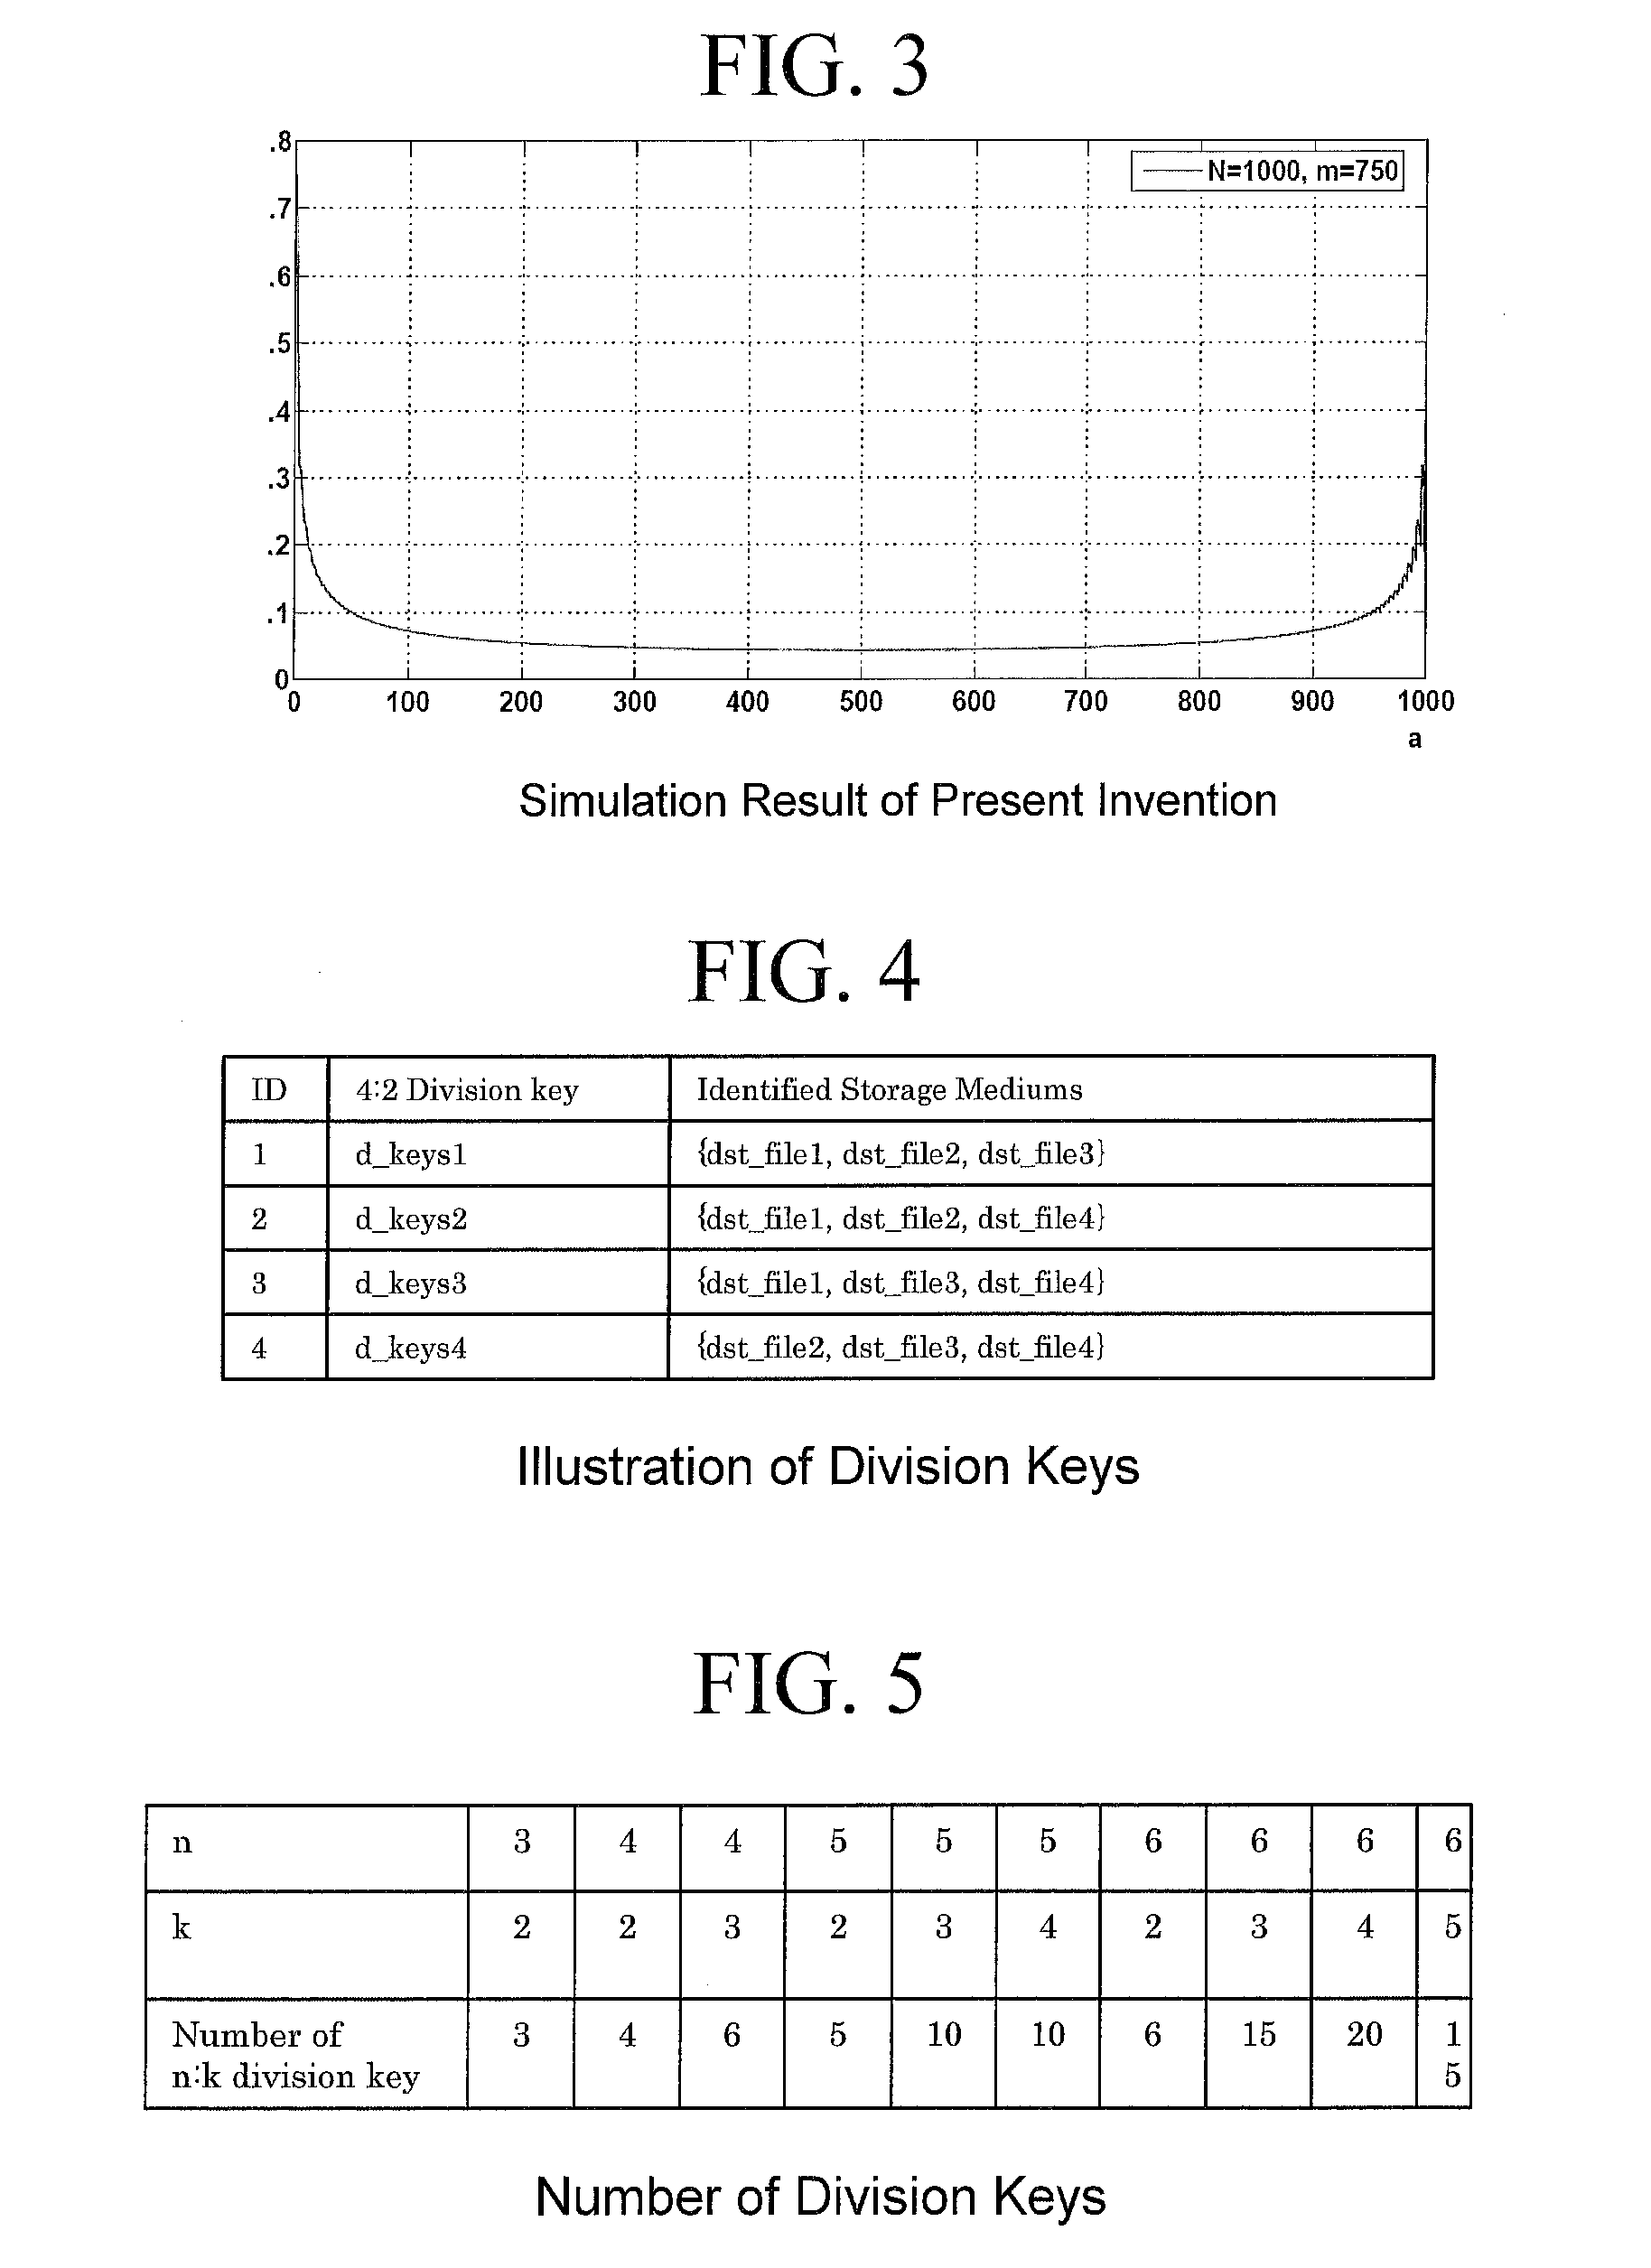 Distributed archive system, data archive device, and data restoring device